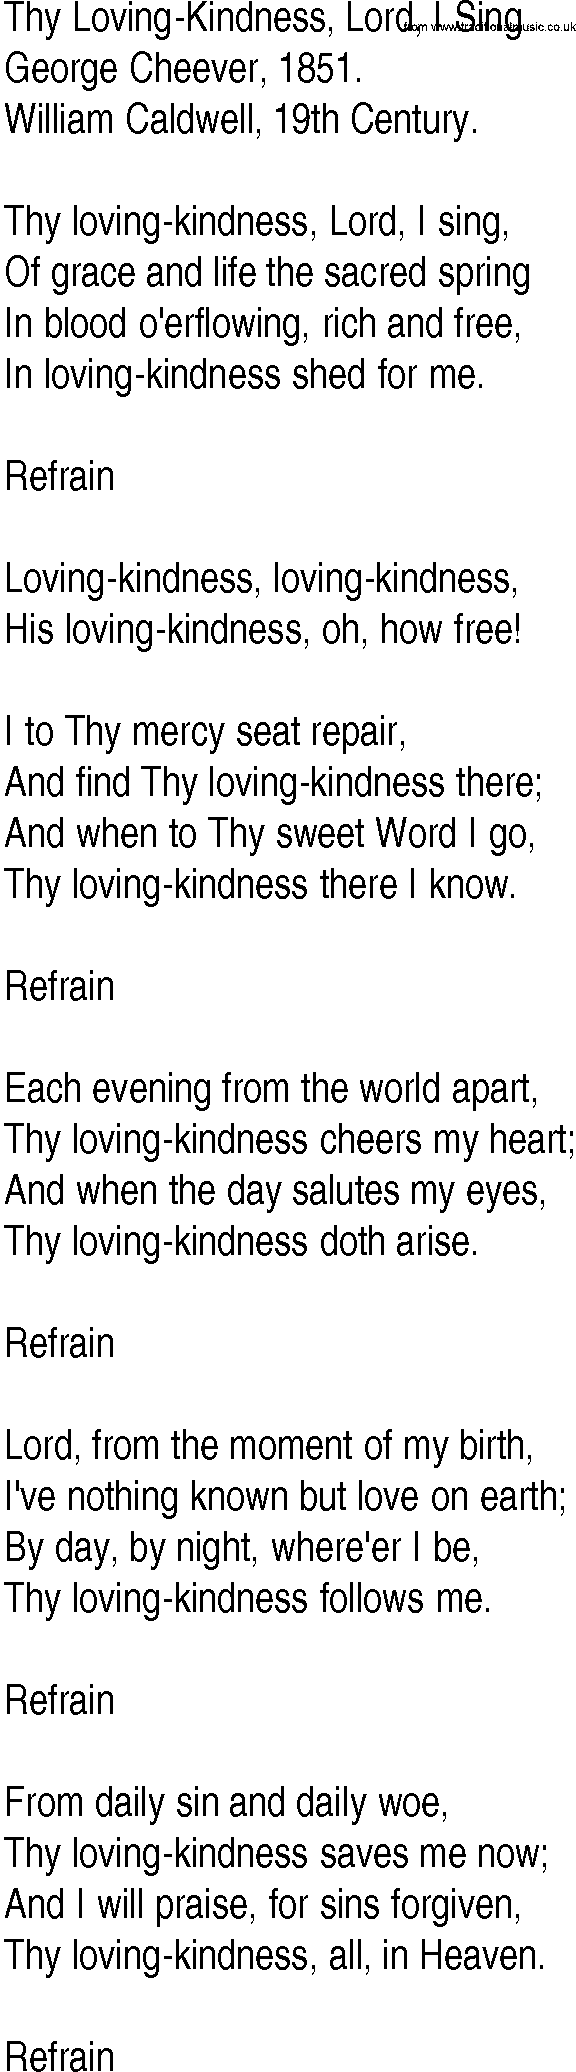 Hymn and Gospel Song: Thy Loving-Kindness, Lord, I Sing by George Cheever lyrics